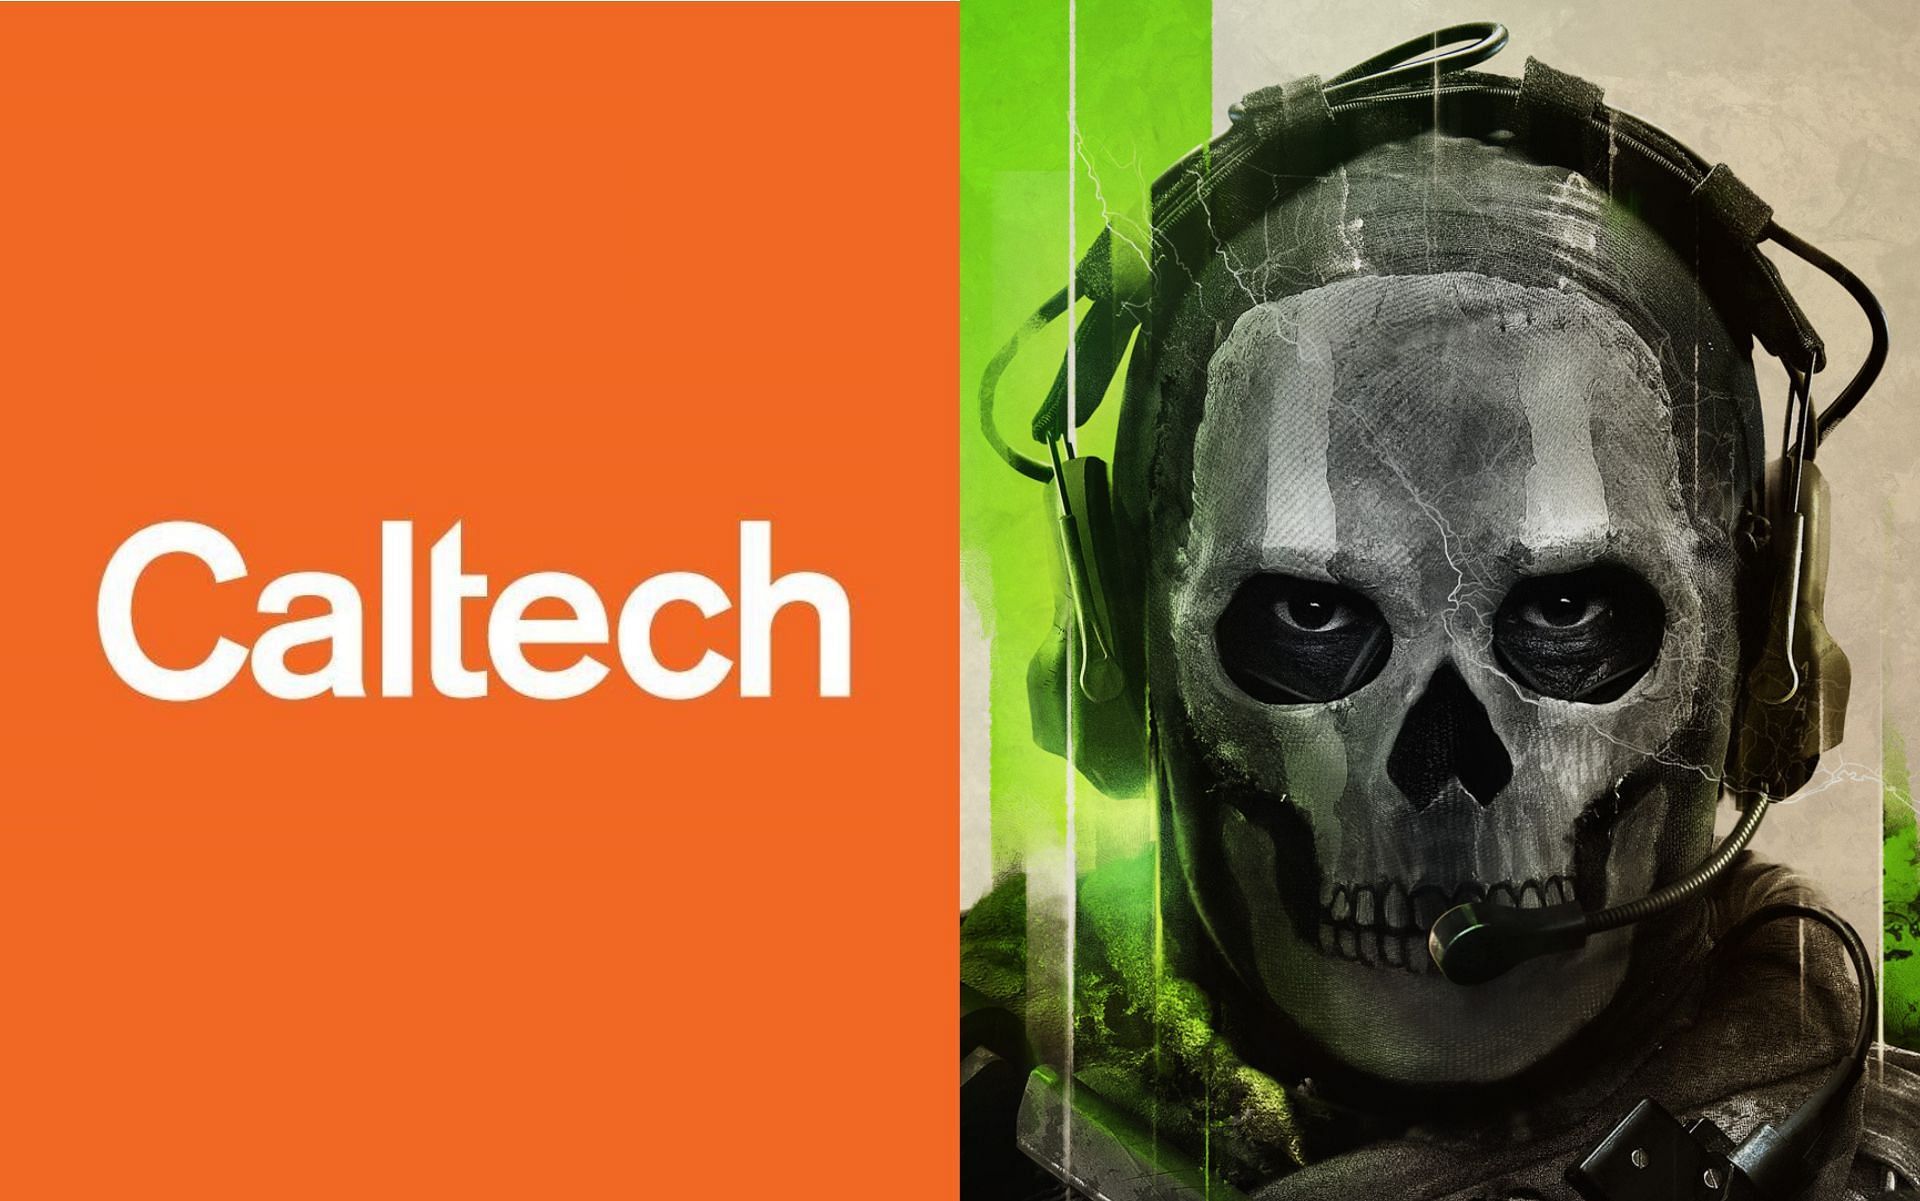 Caltech and Call of Duty team up to combat toxicity online (Images via Caltech and Activision)